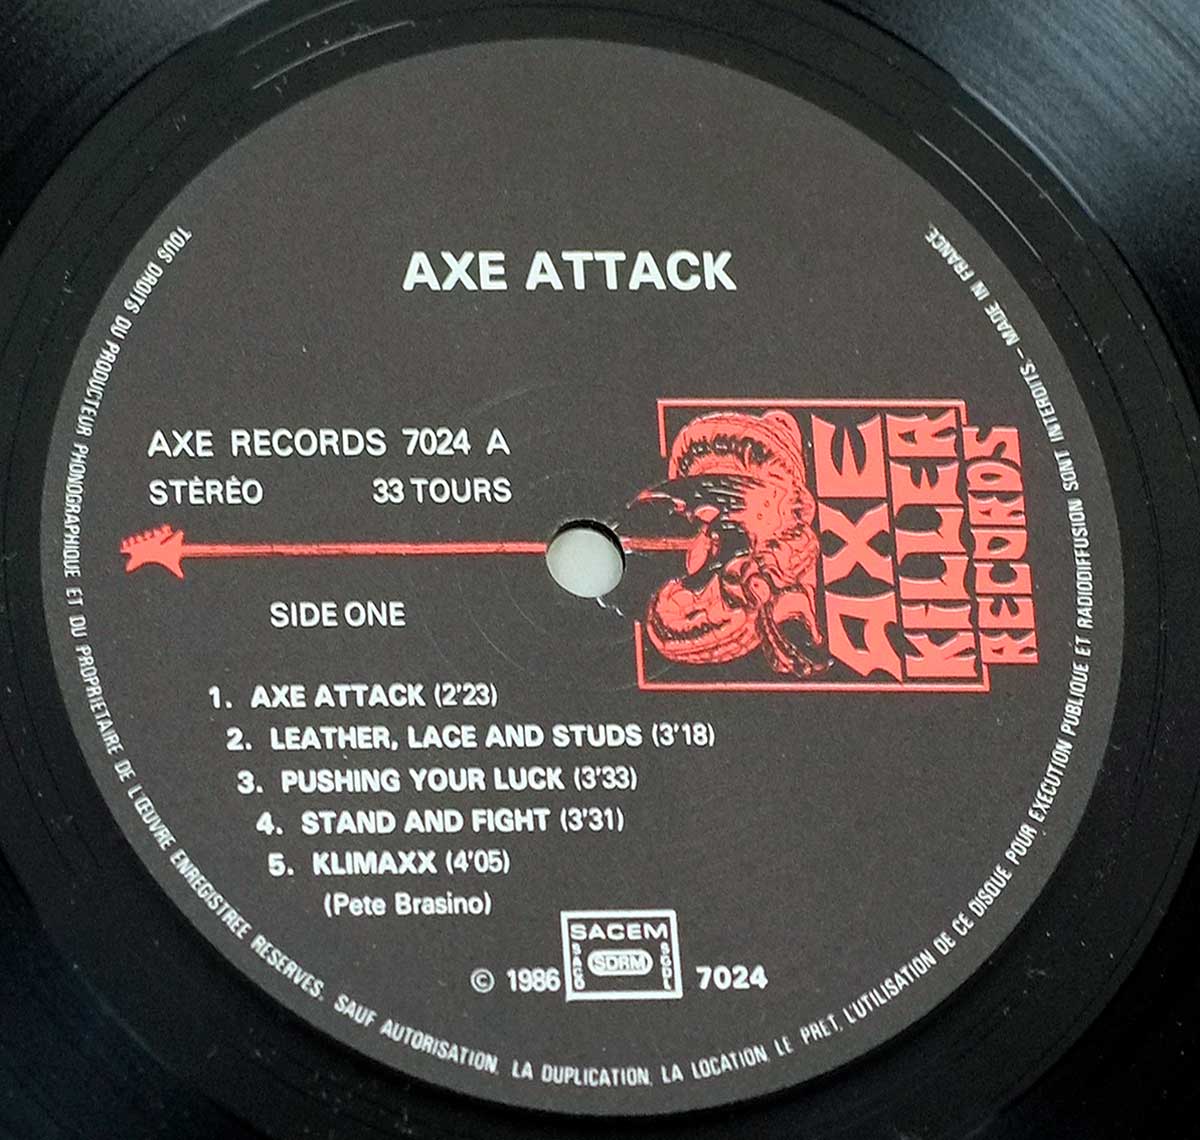 Photo of 12" LP Record Side One AXE ATTACK, Guitar Pete's  – Nightmare  Vinyl Record Gallery https://vinyl-records.nl//